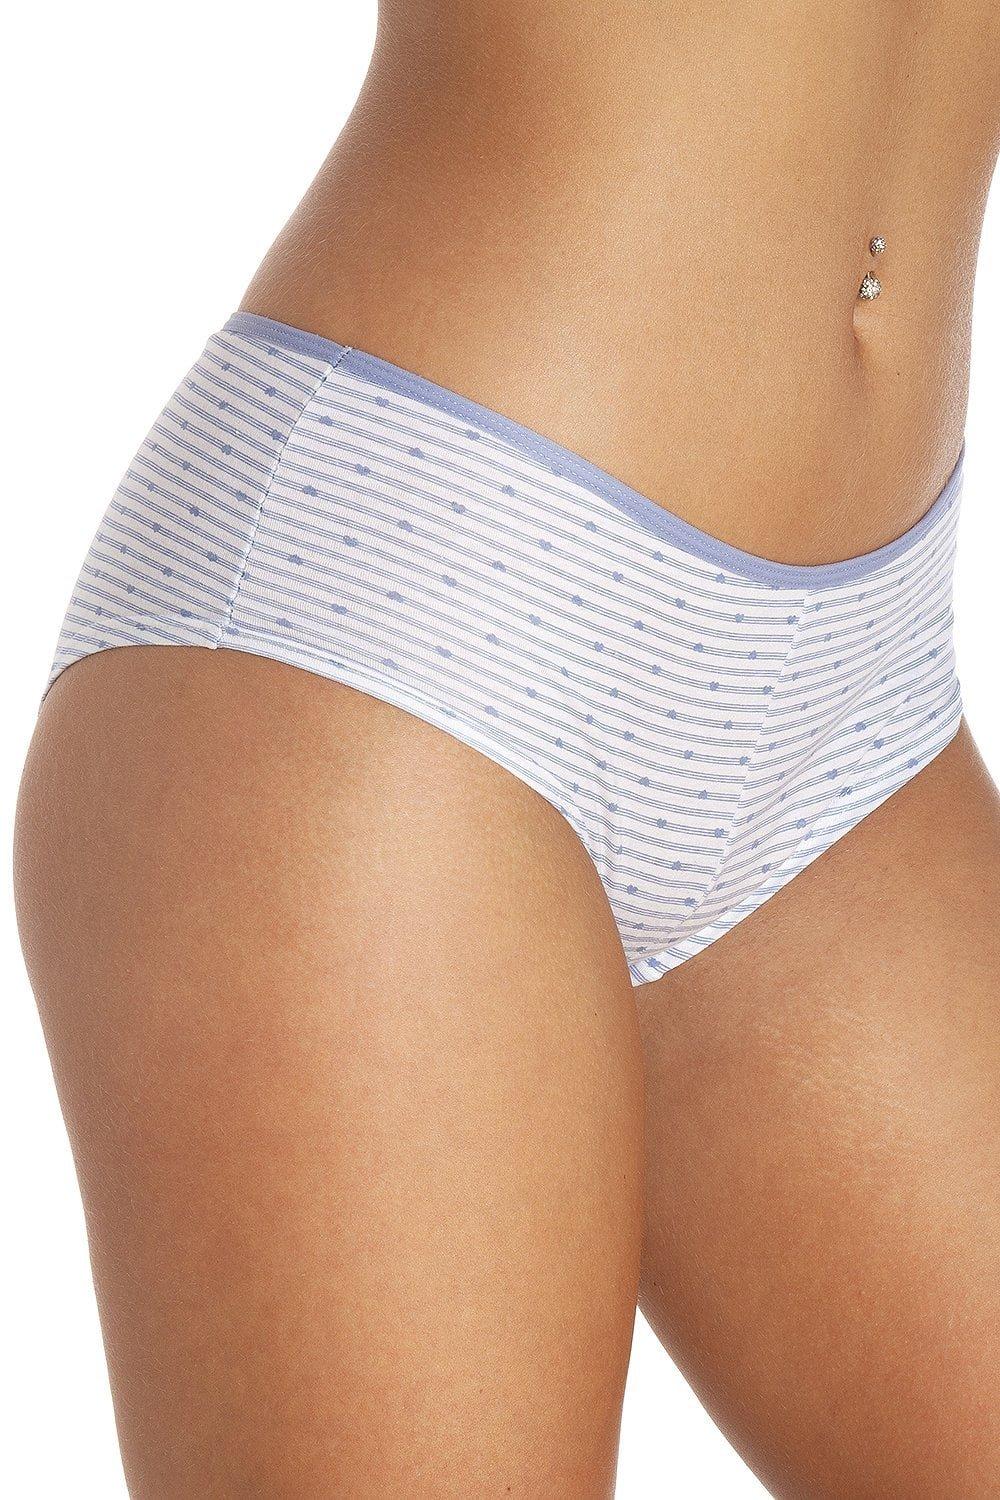 Camille Camille Womens Four Pack Mixed Full Briefs - Camille from Camille  Lingerie UK